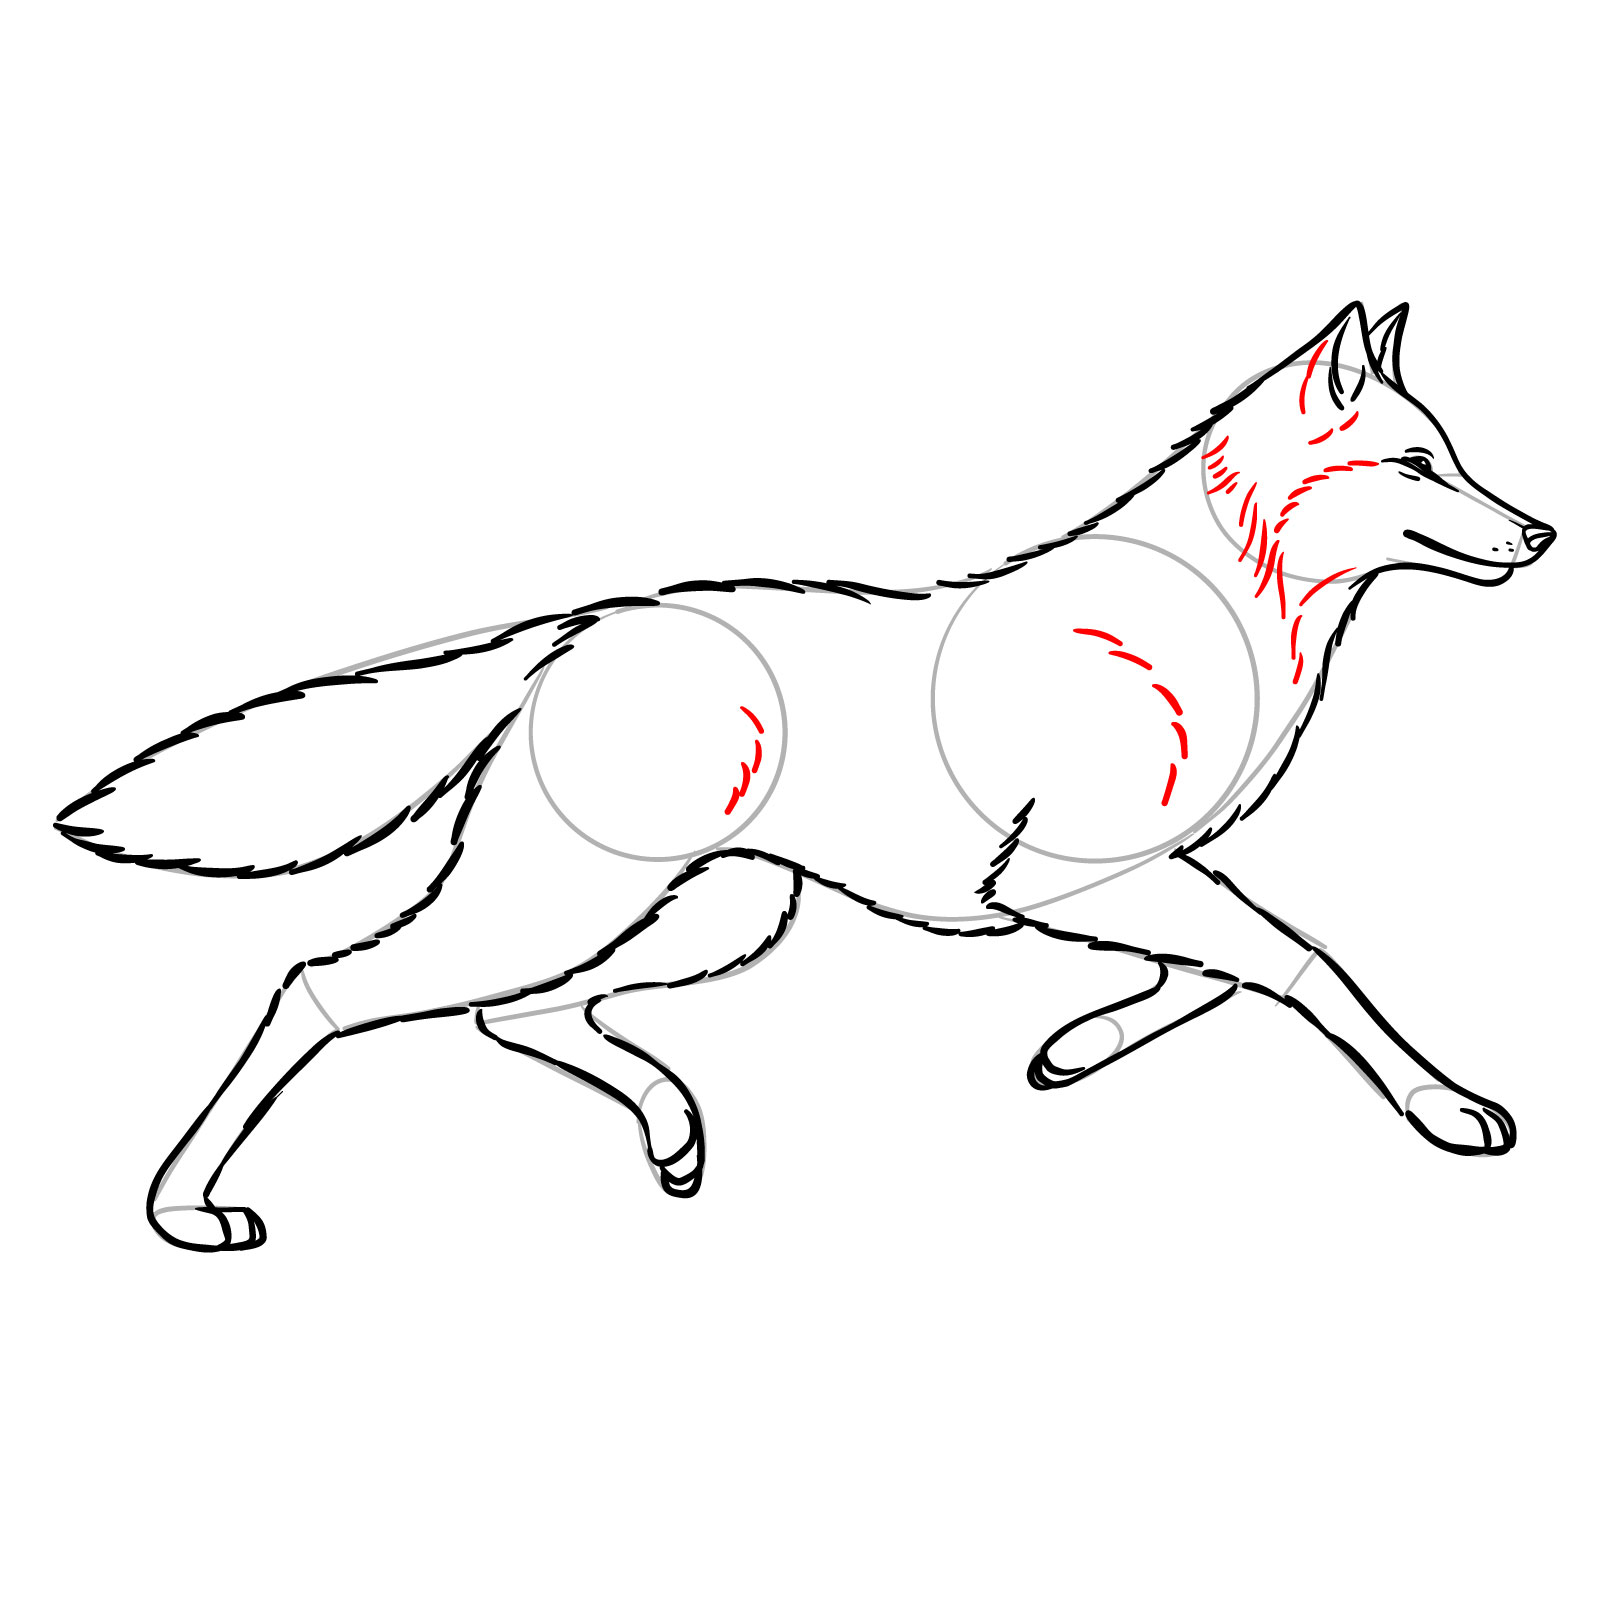 Adding fur texture and muscle details to a running wolf illustration - step 11